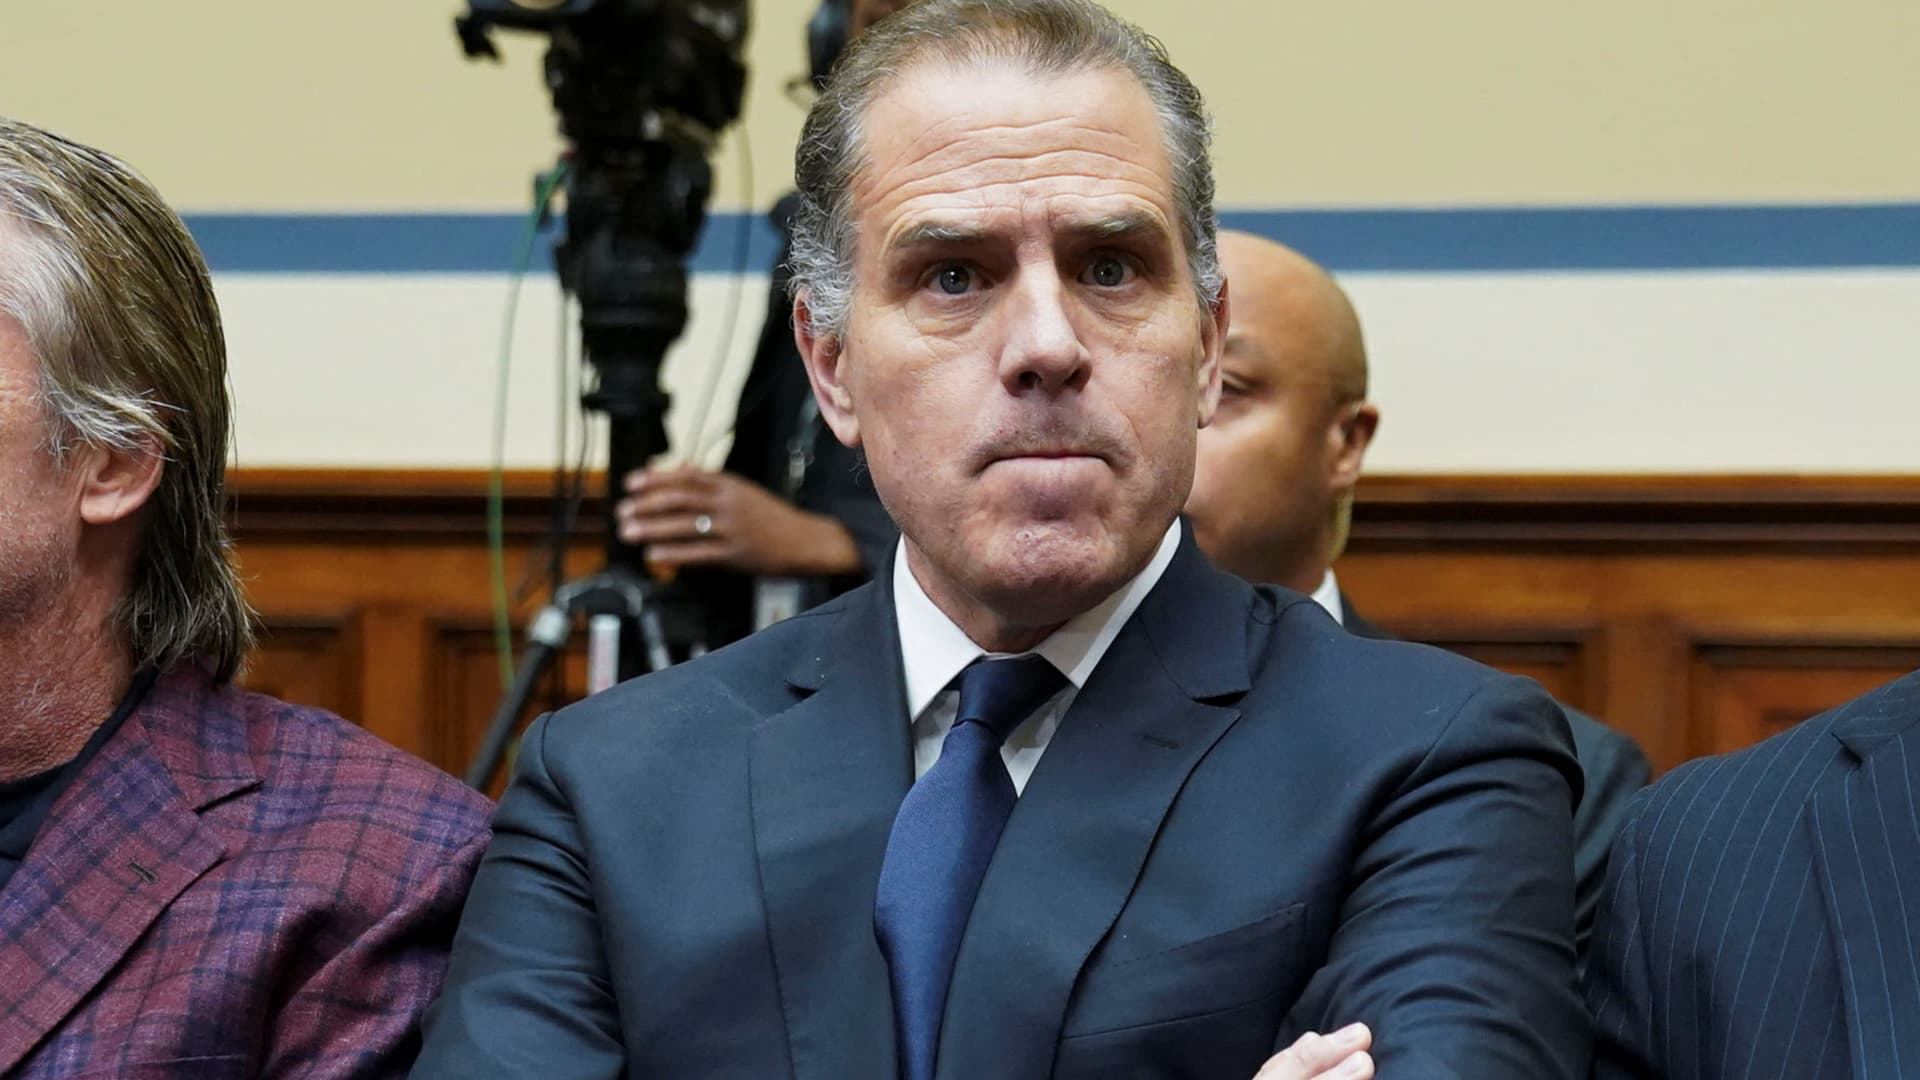 Hunter Biden agrees to deposition, Congress moves to contempt resolution